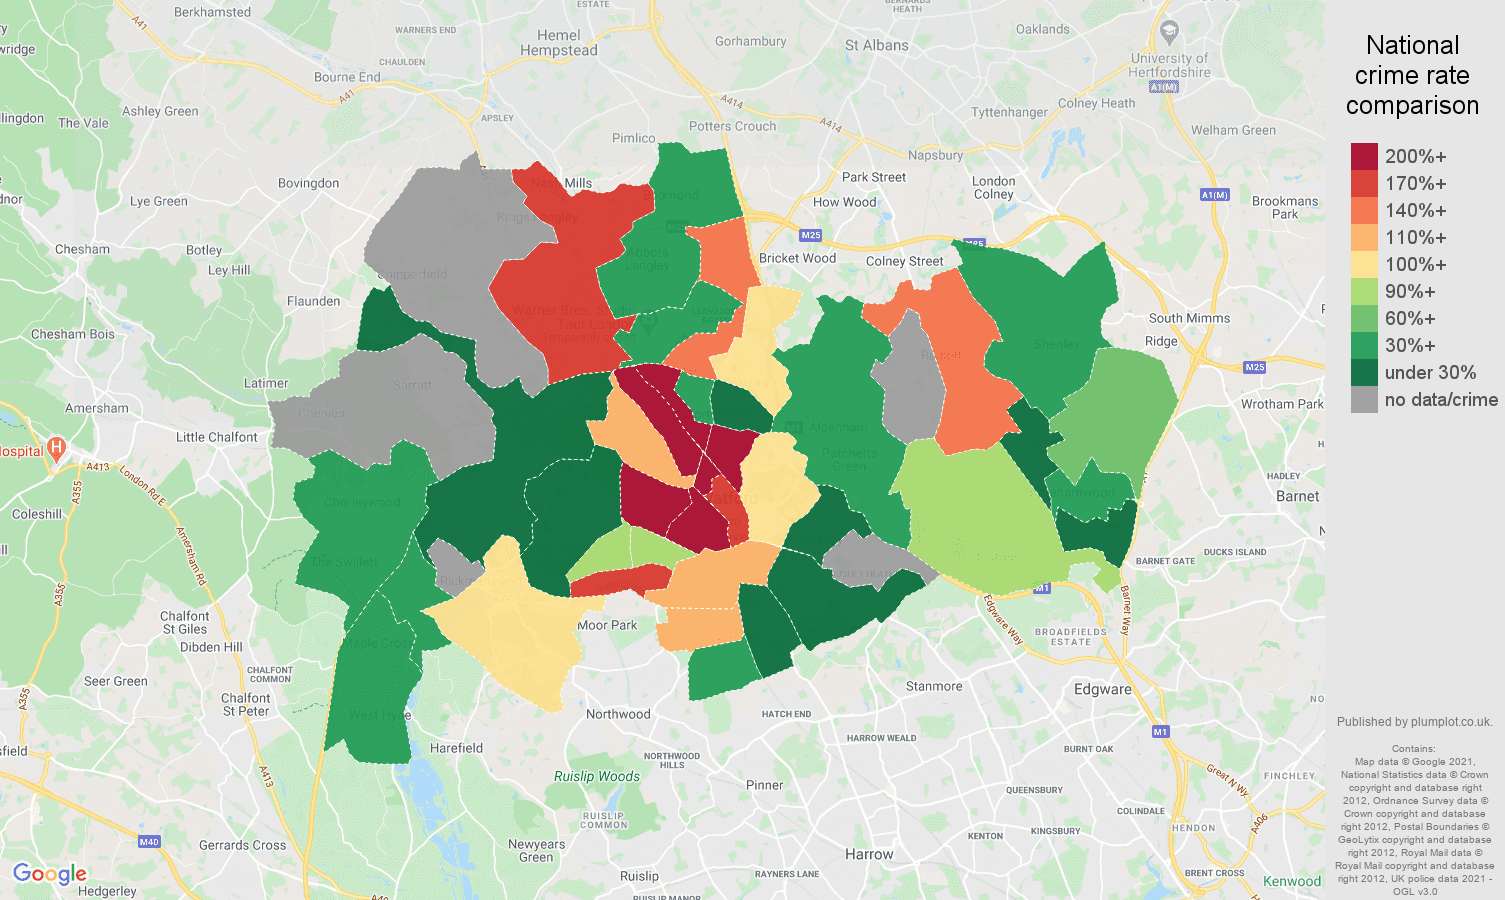 Watford bicycle theft crime rate comparison map